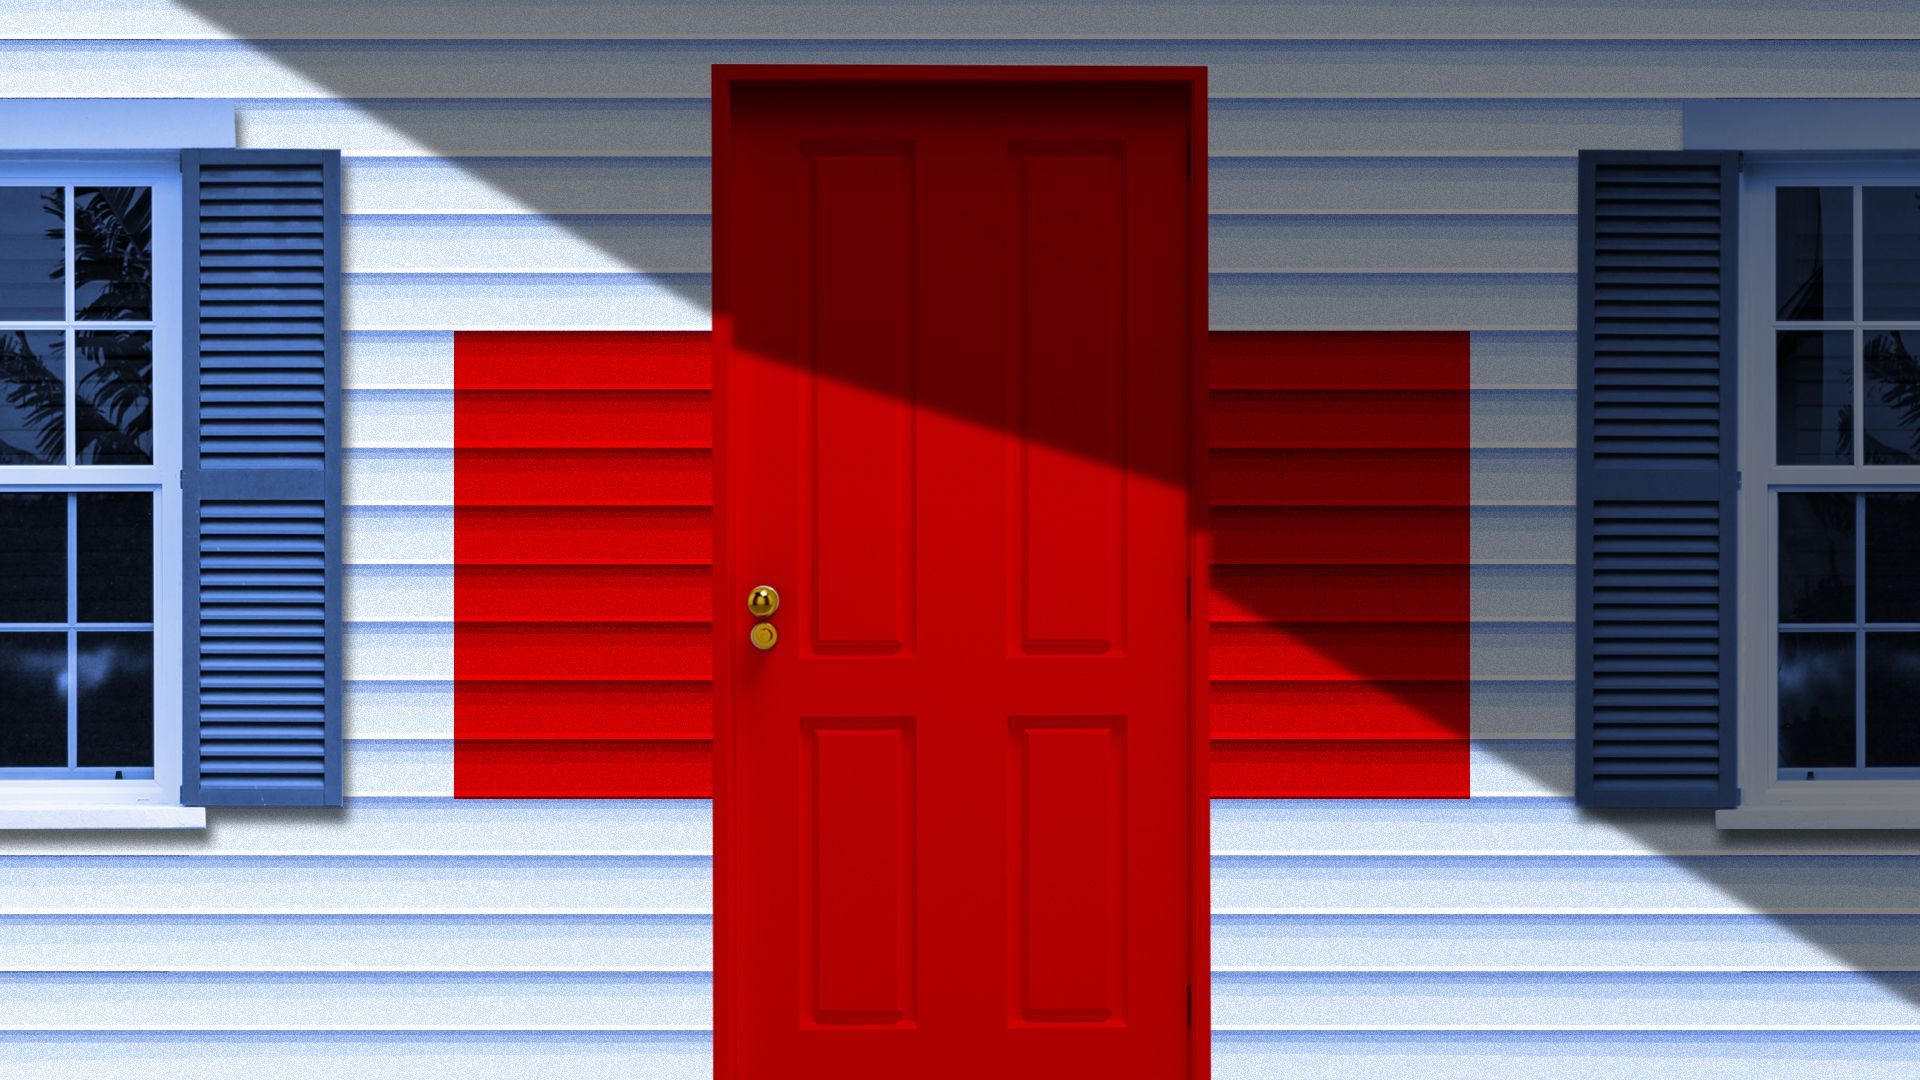 Illustration of a shadow cast over a home with a red cross for a door